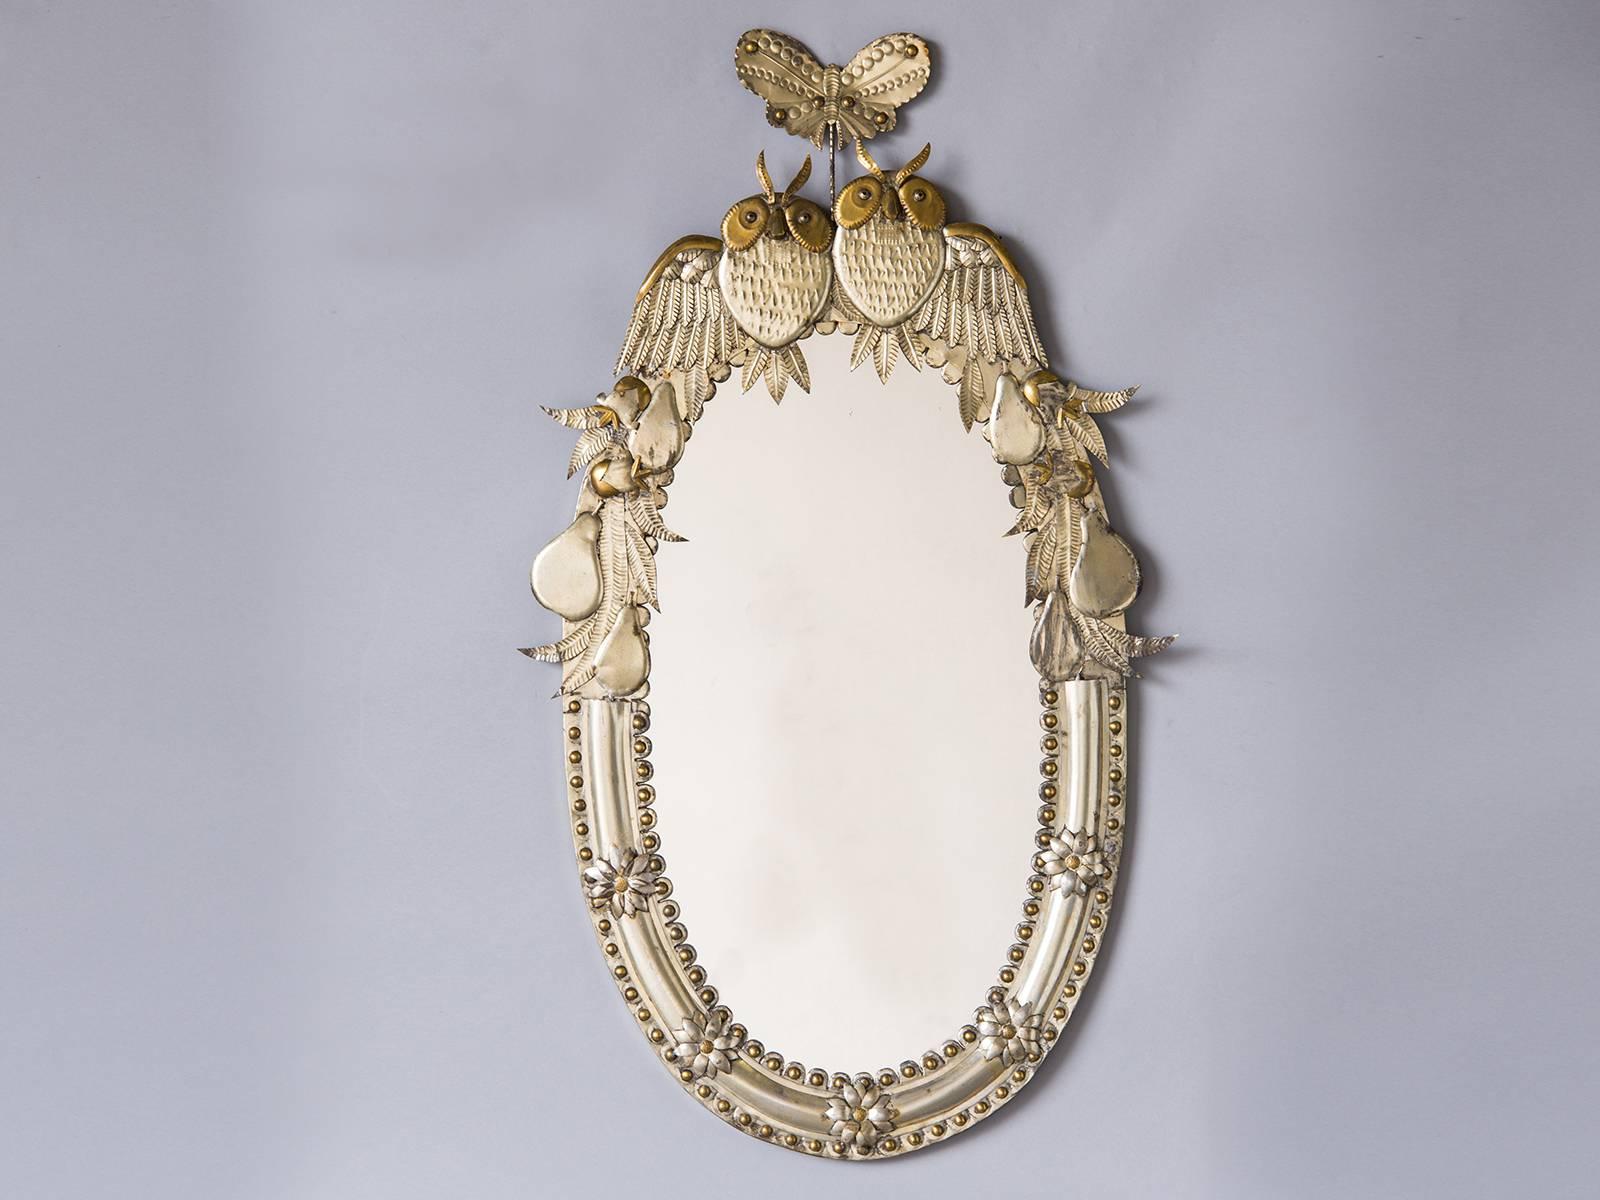 This unique mirror celebrates the union of a couple in marriage using the art of metal working that has been practiced for centuries. The wonderful combination of the oval shape along with the decorative embellishments done in both silvered metal as